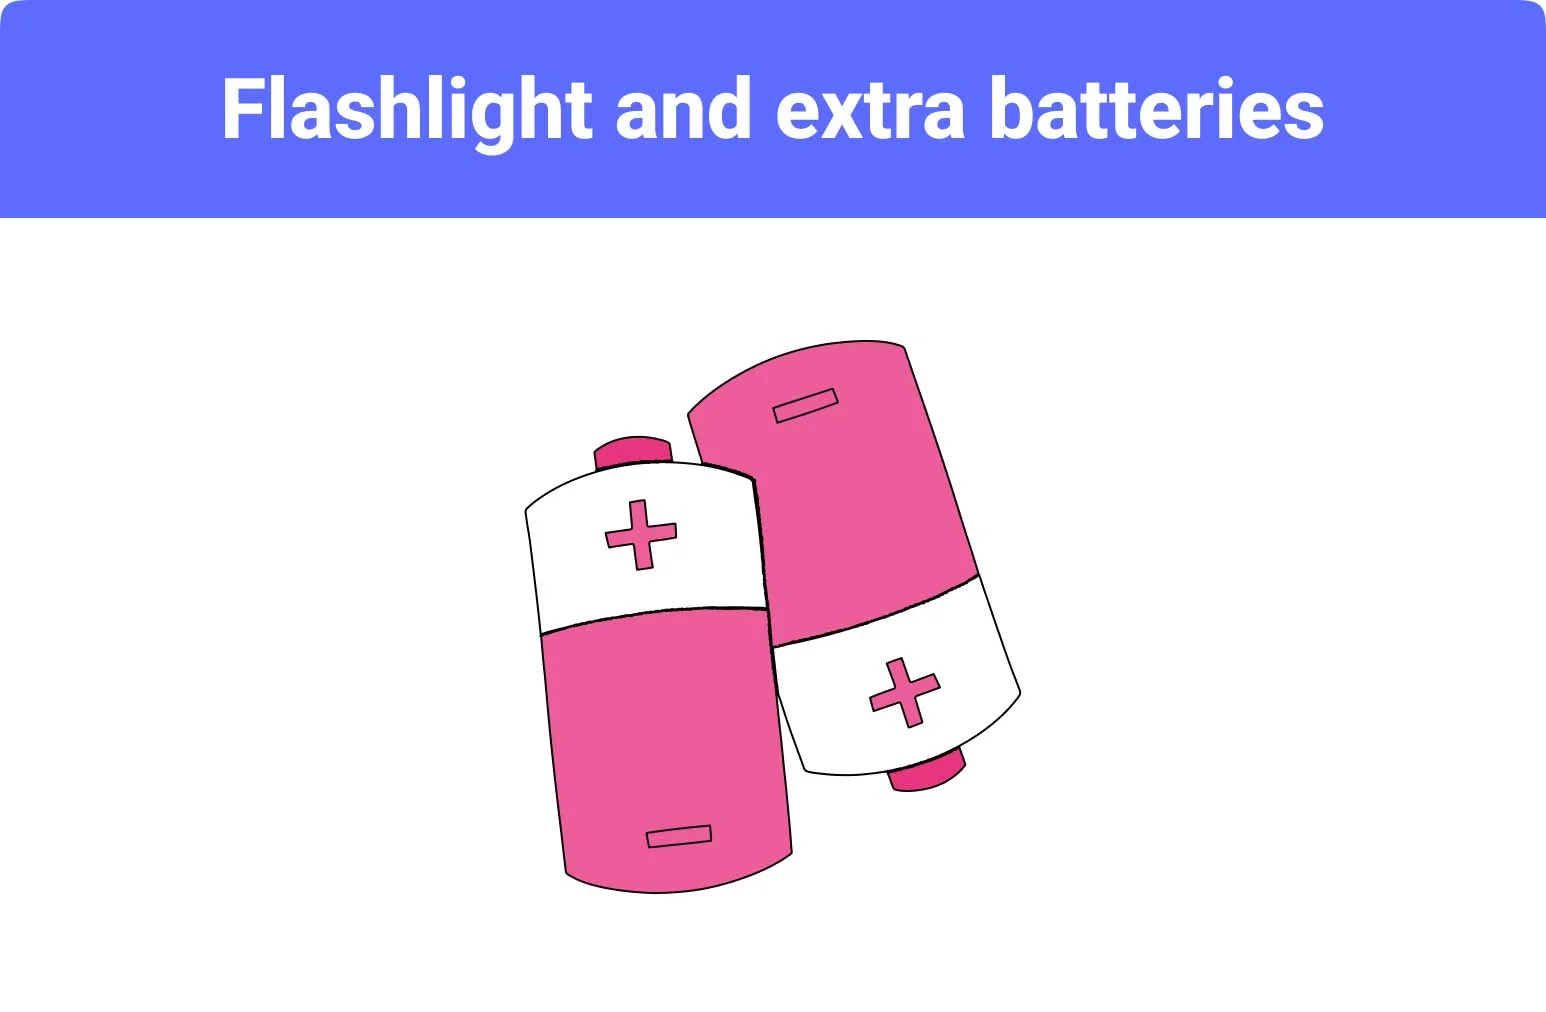 Flashlight and extra batteries